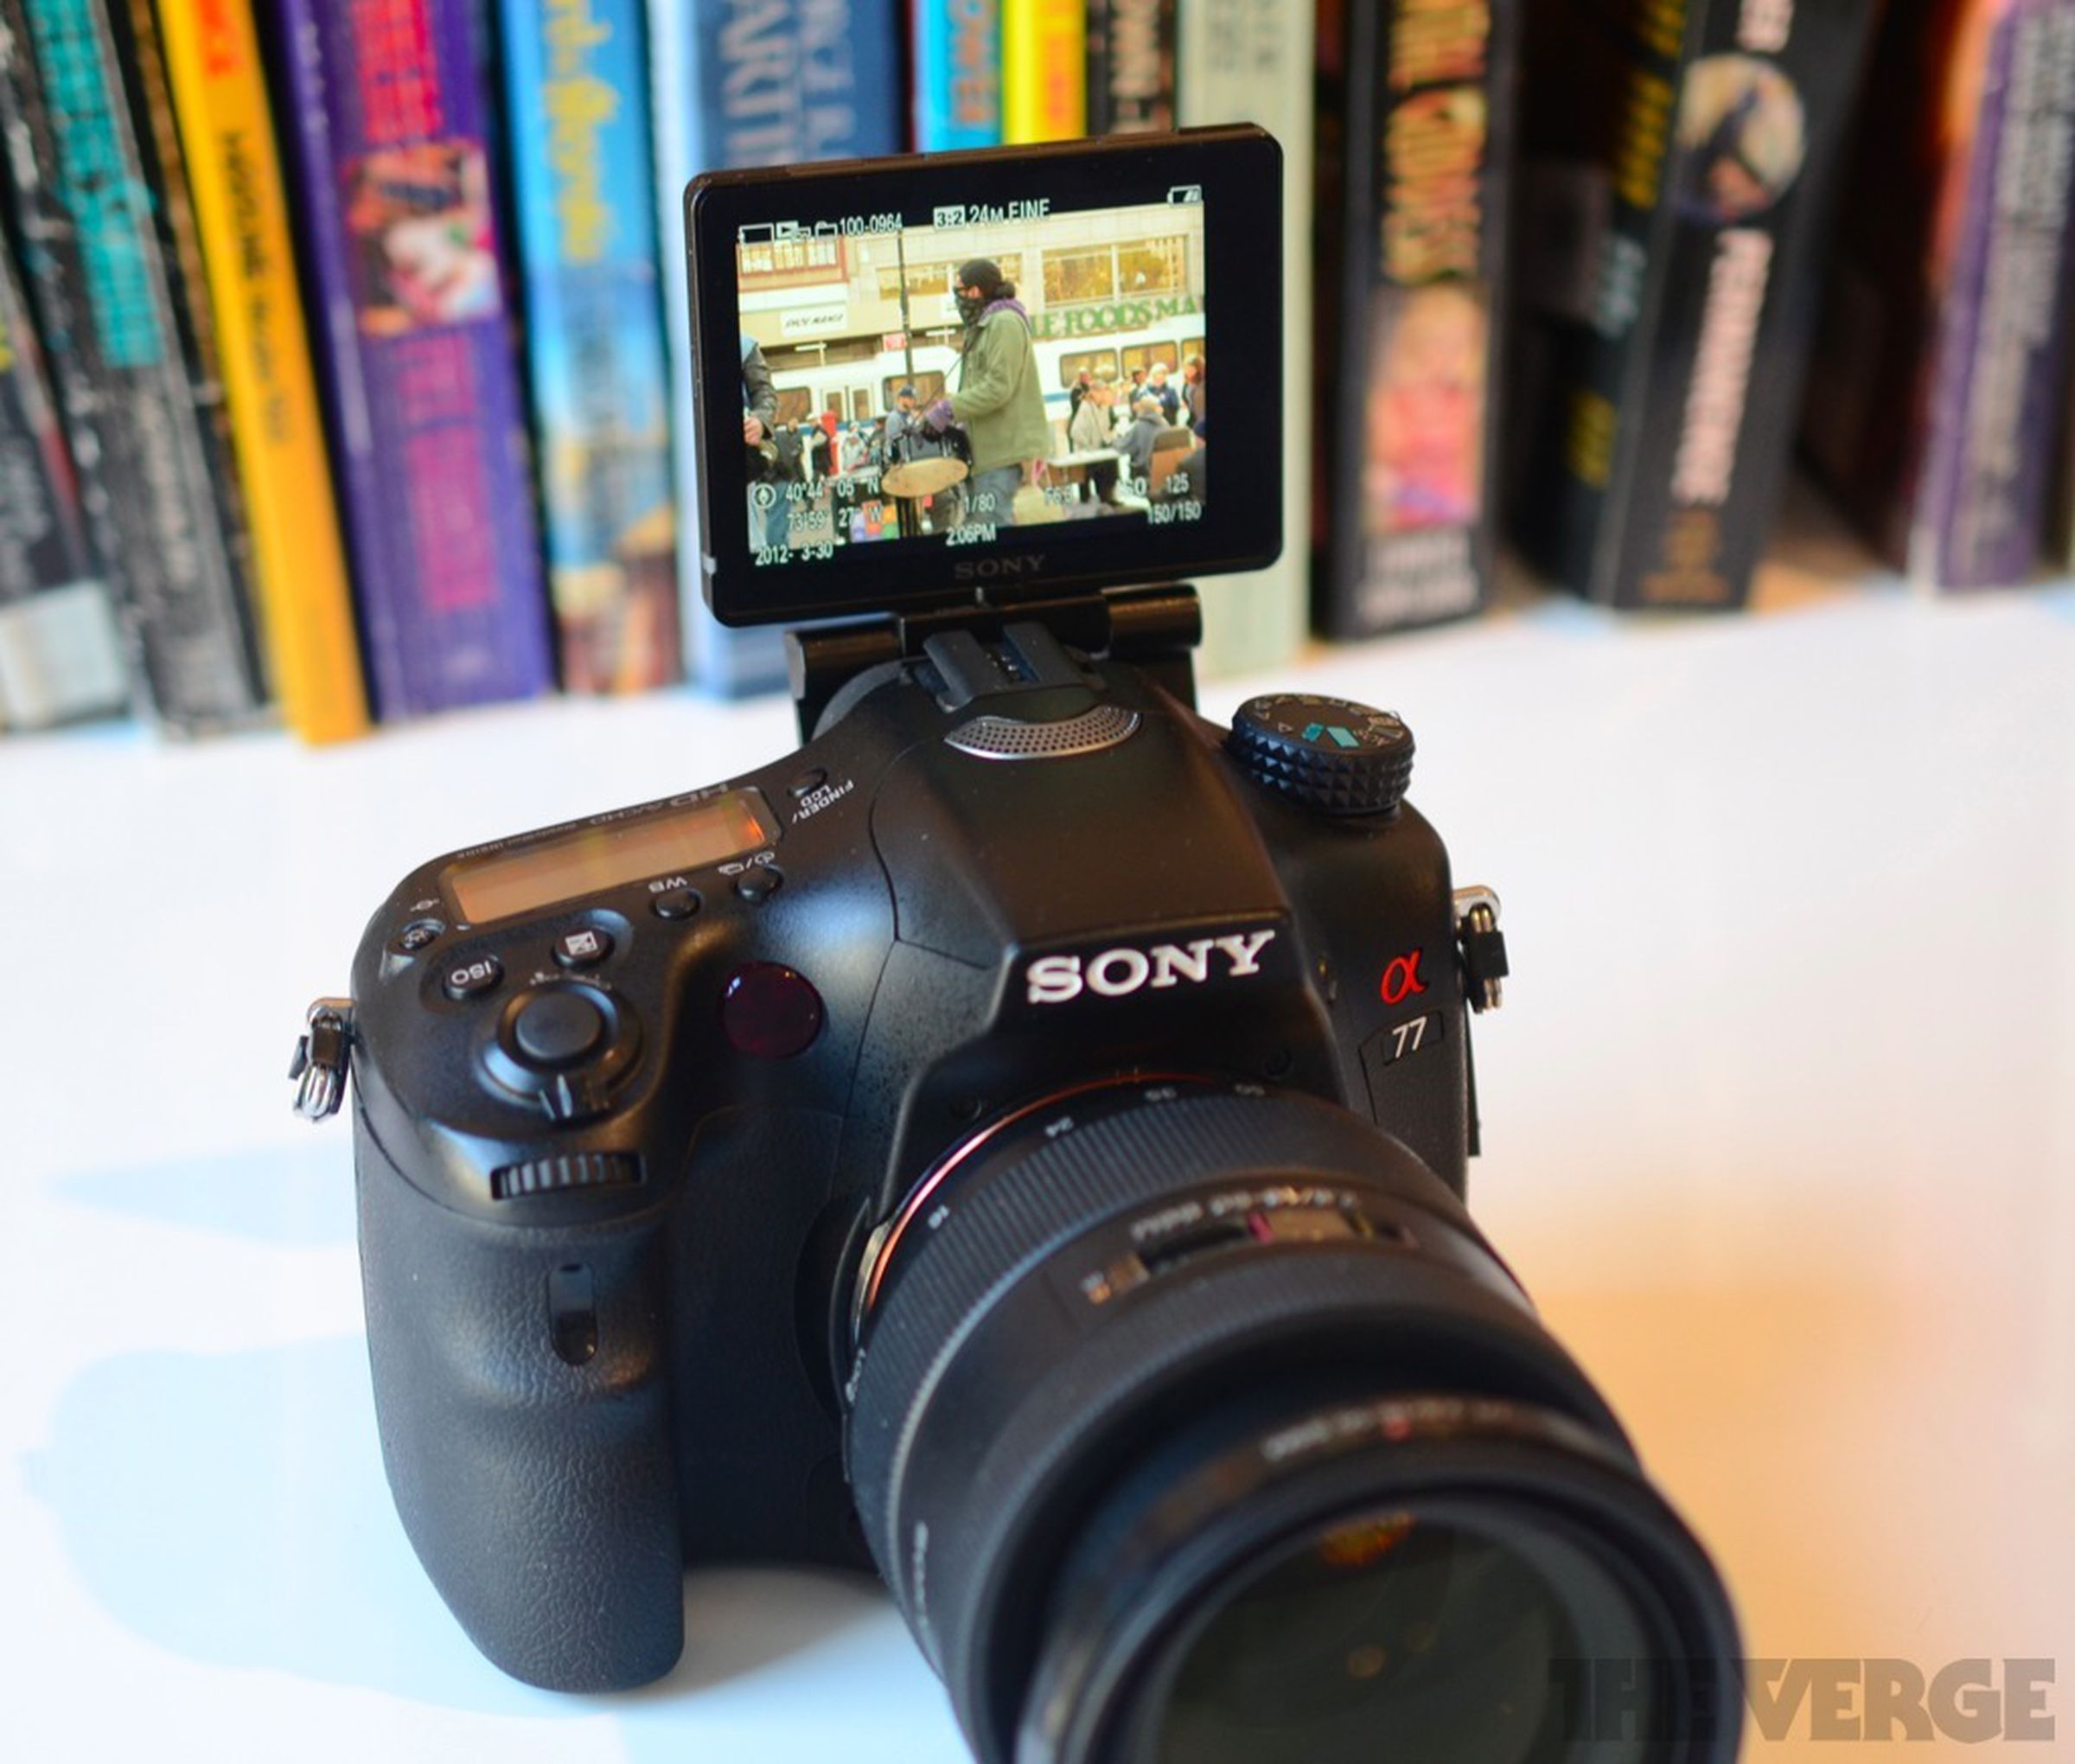 Sony Alpha SLT-A77 review pictures